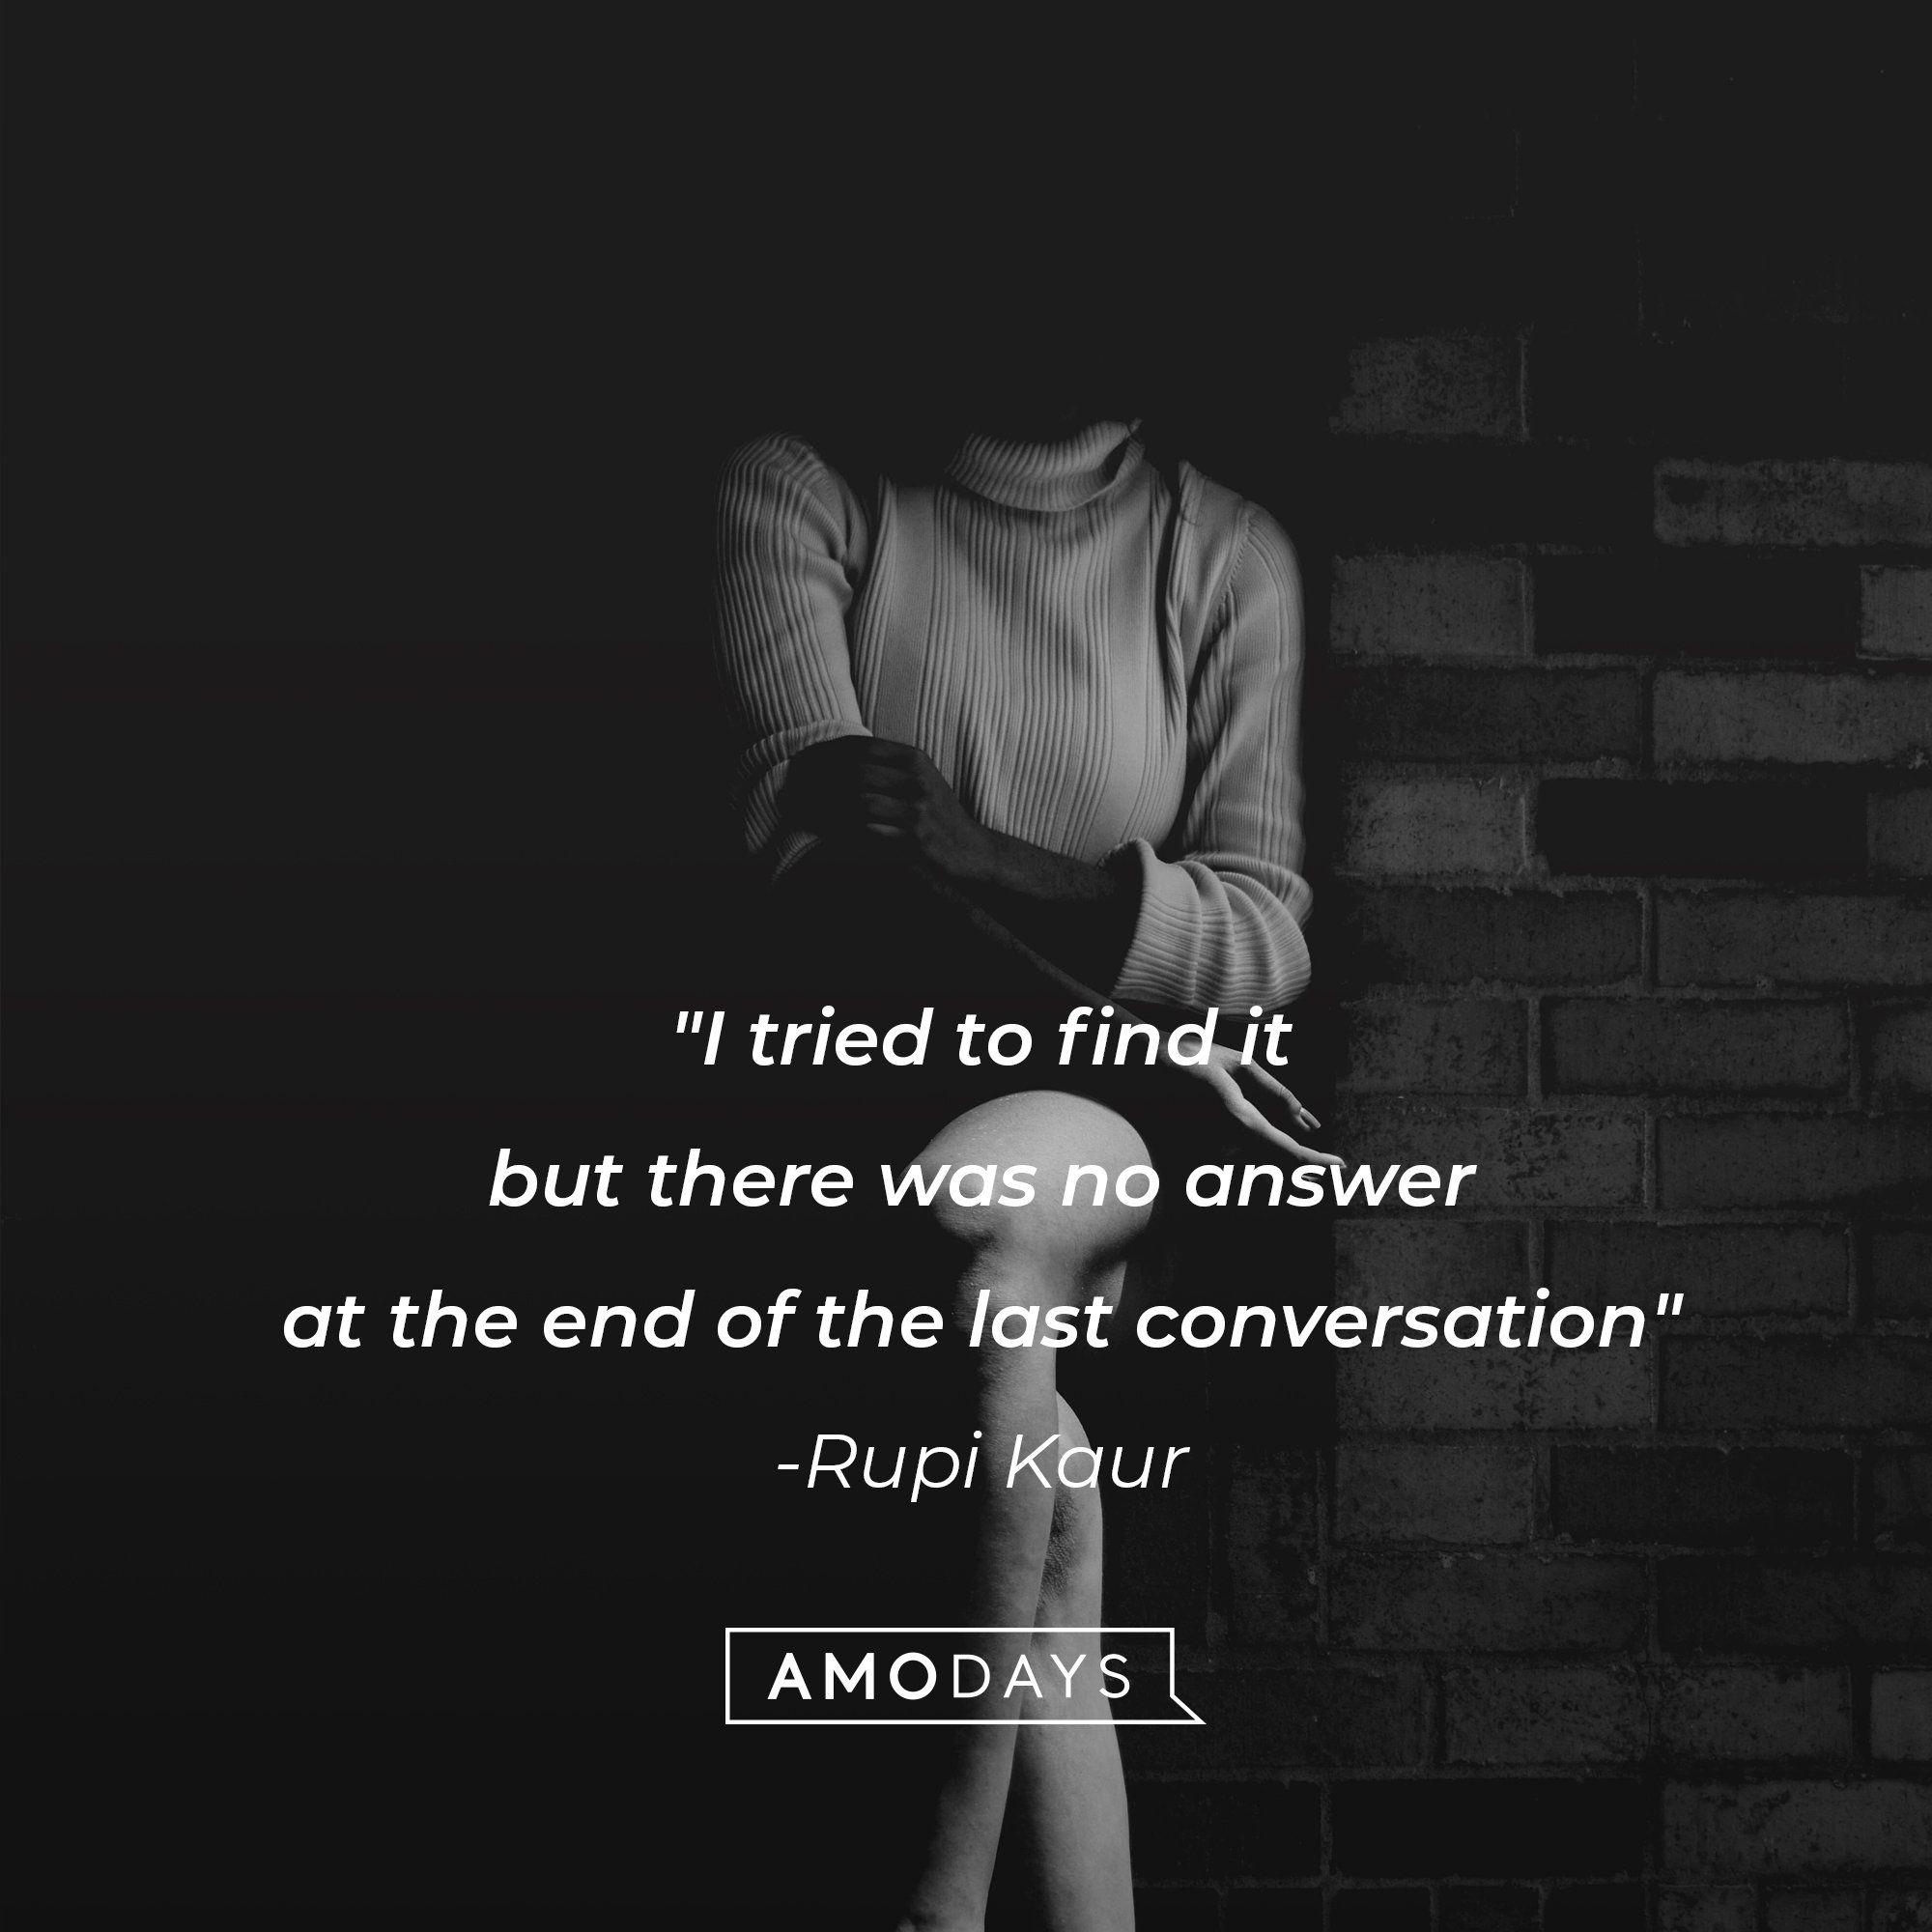 Rupi Kaur's quote: "I tried to find it but there was no answer at the end of the last conversation" | Image: AmoDays